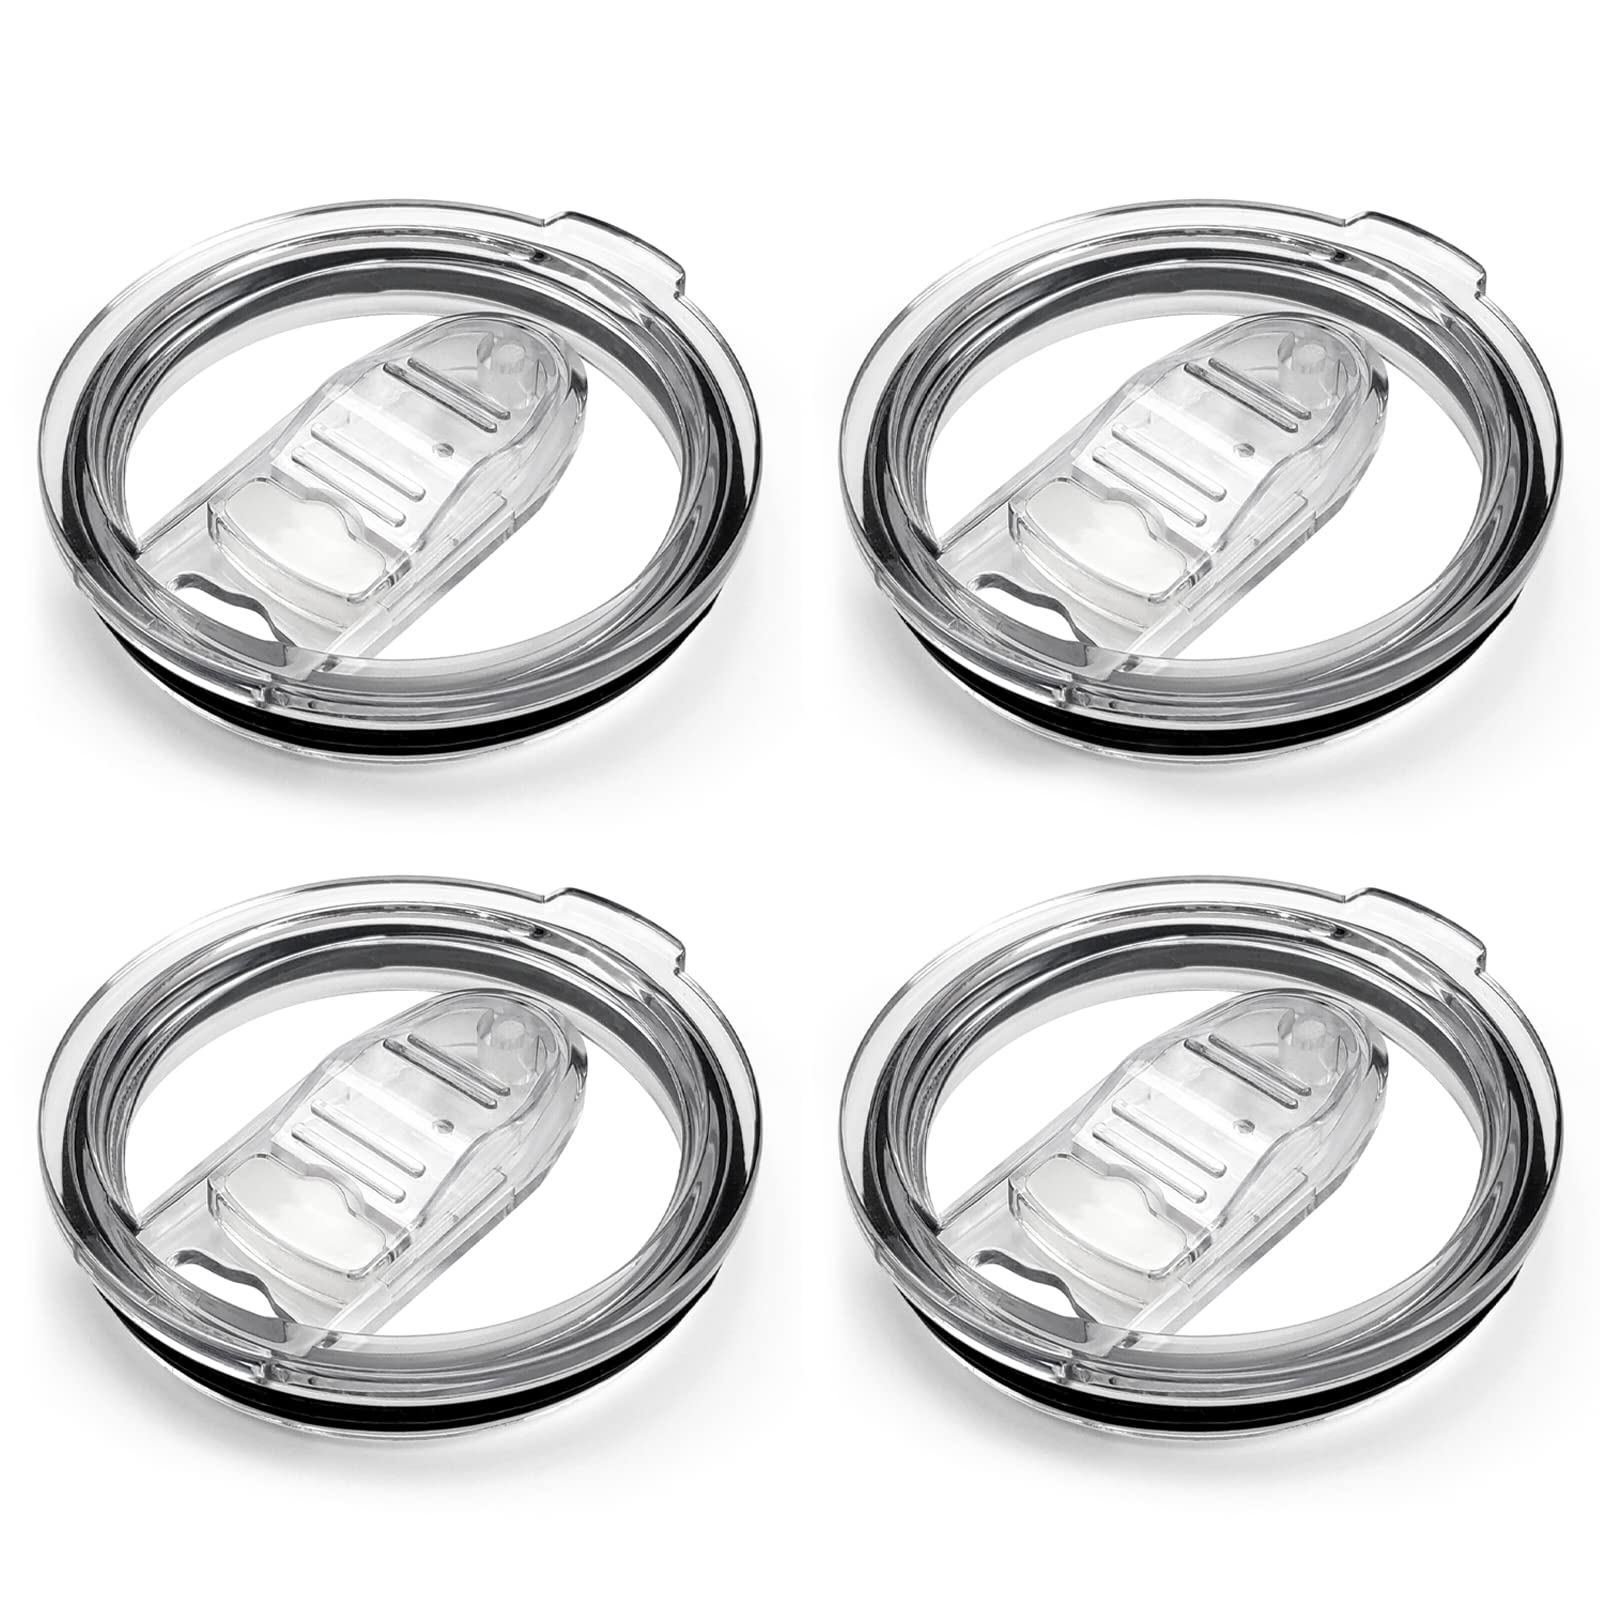 XccMe 30oz Tumbler Replacement Lids,4 Pack Spill Proof Splash Resistant Covers,Replacement Classic Stainless Steel Tumblers lids fit for YETI Rambler,Atlin, Juro, SUNWILL, Umite Chef and More